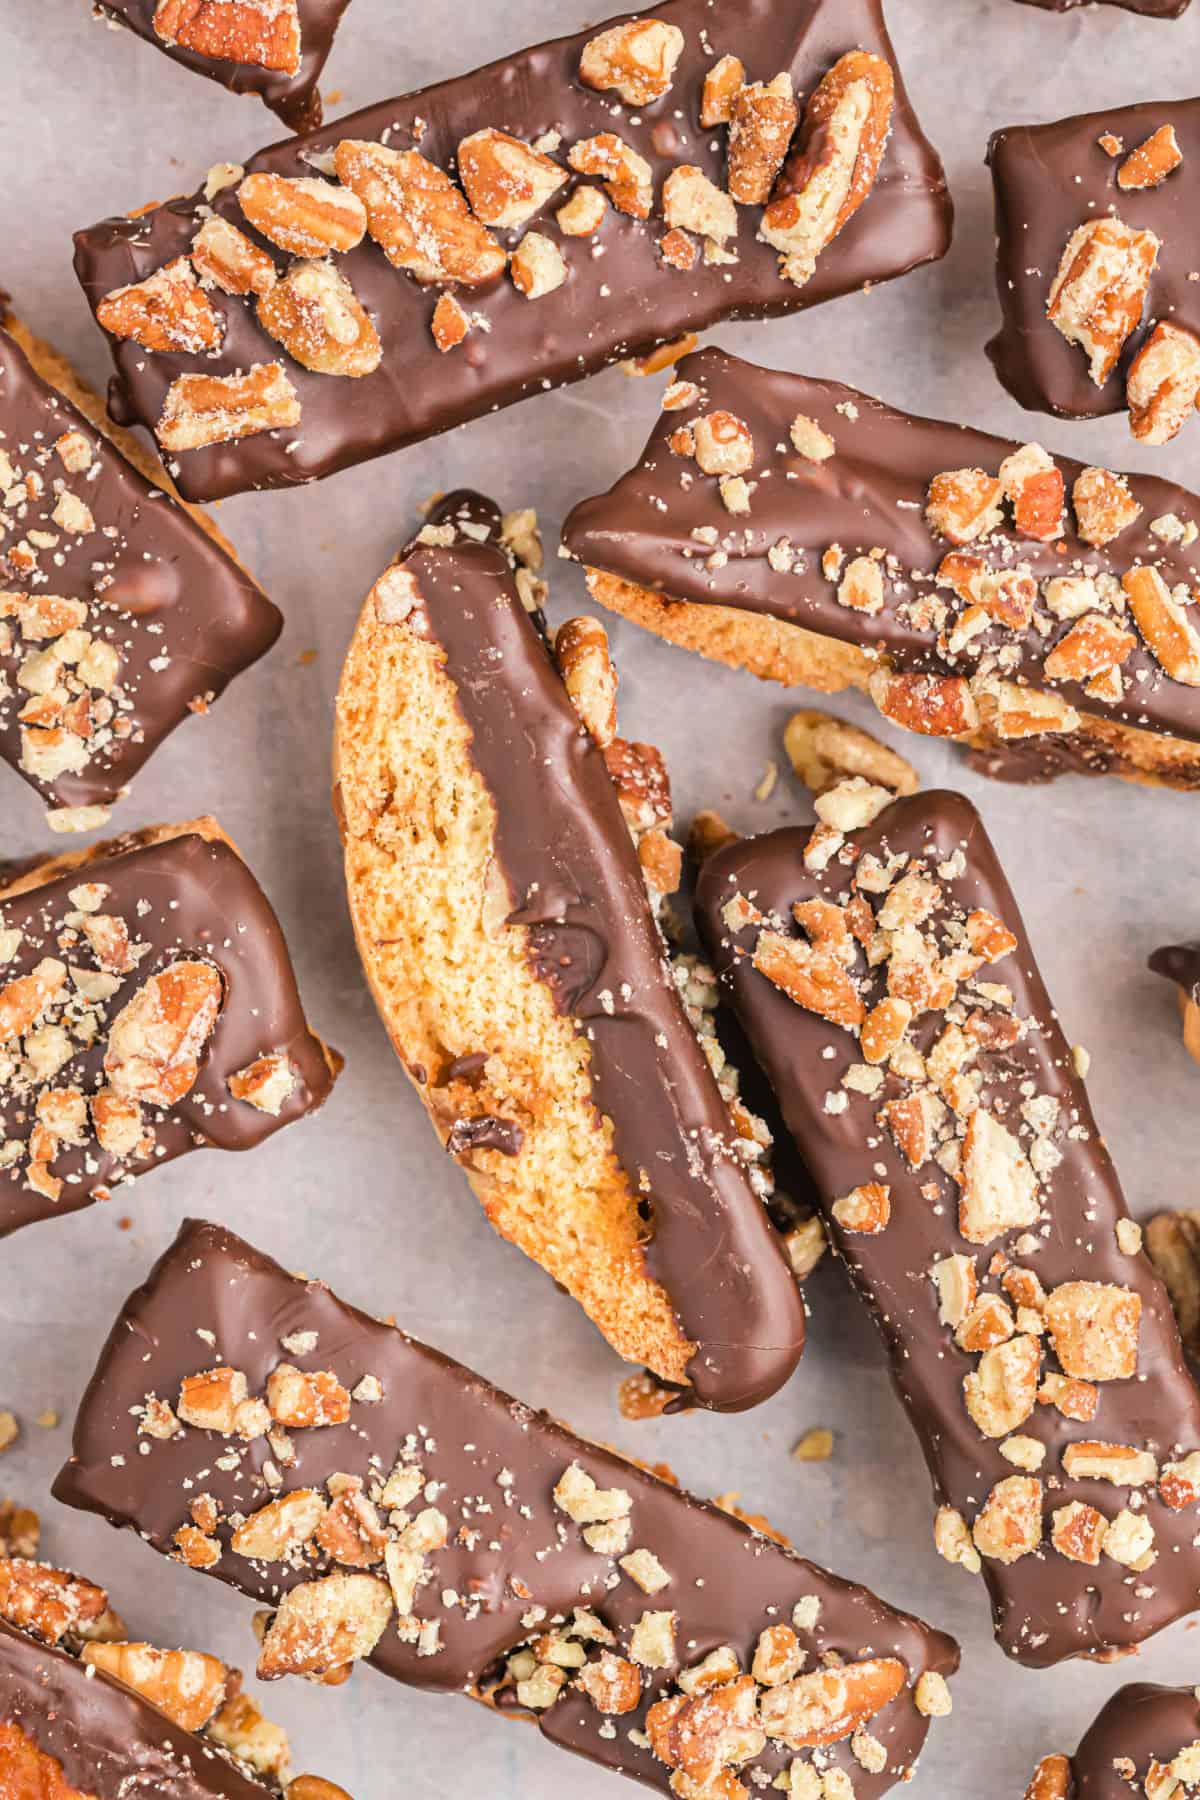 Biscotti dipped in chocolate with pecans.